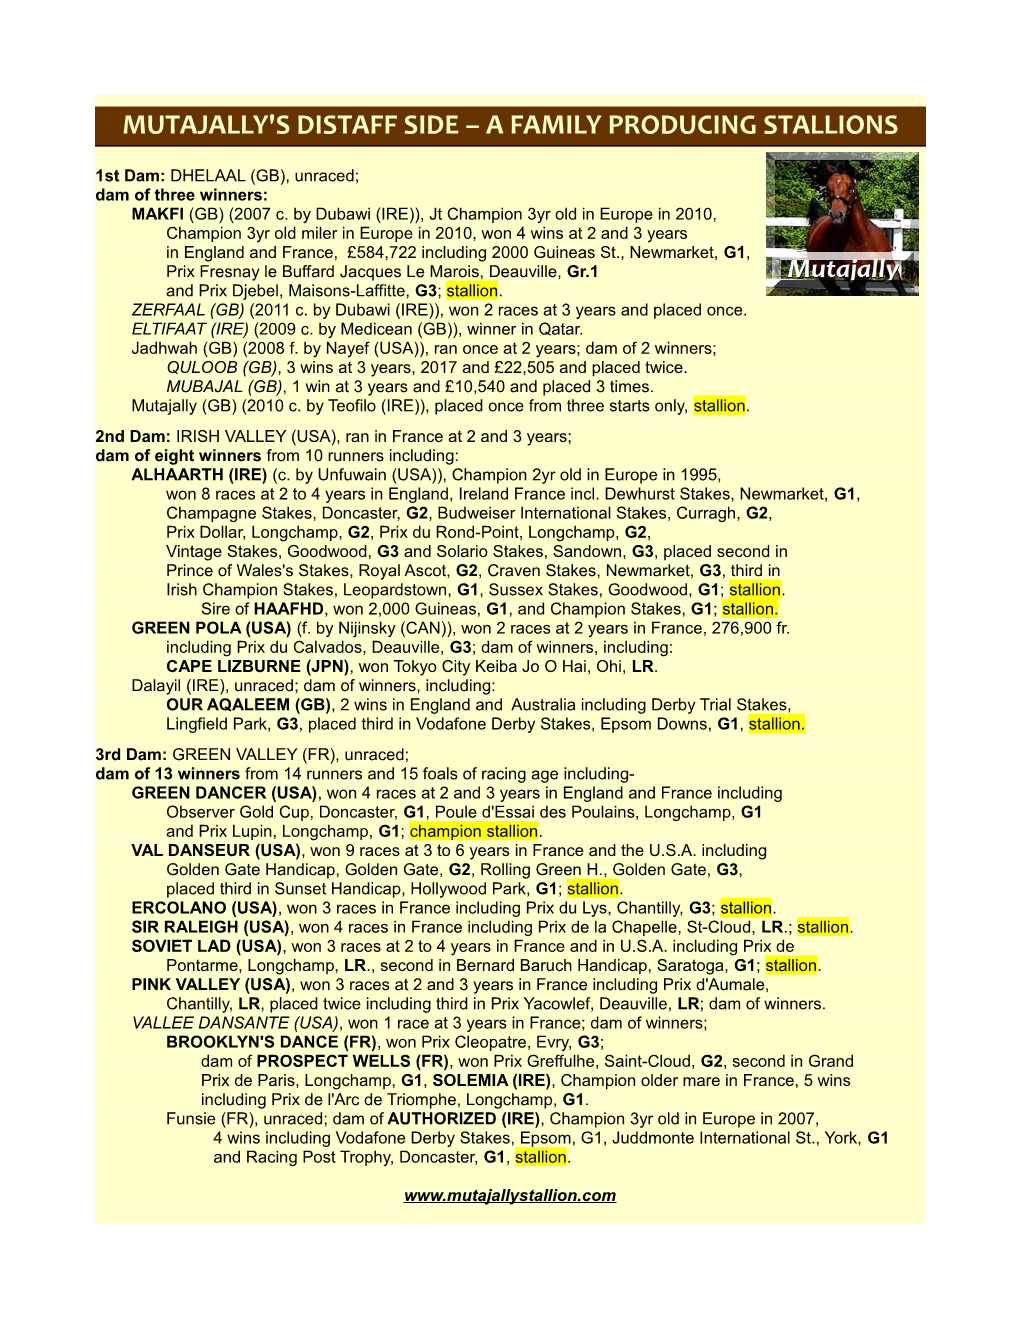 Mutajally's Distaff Side – a Family Producing Stallions